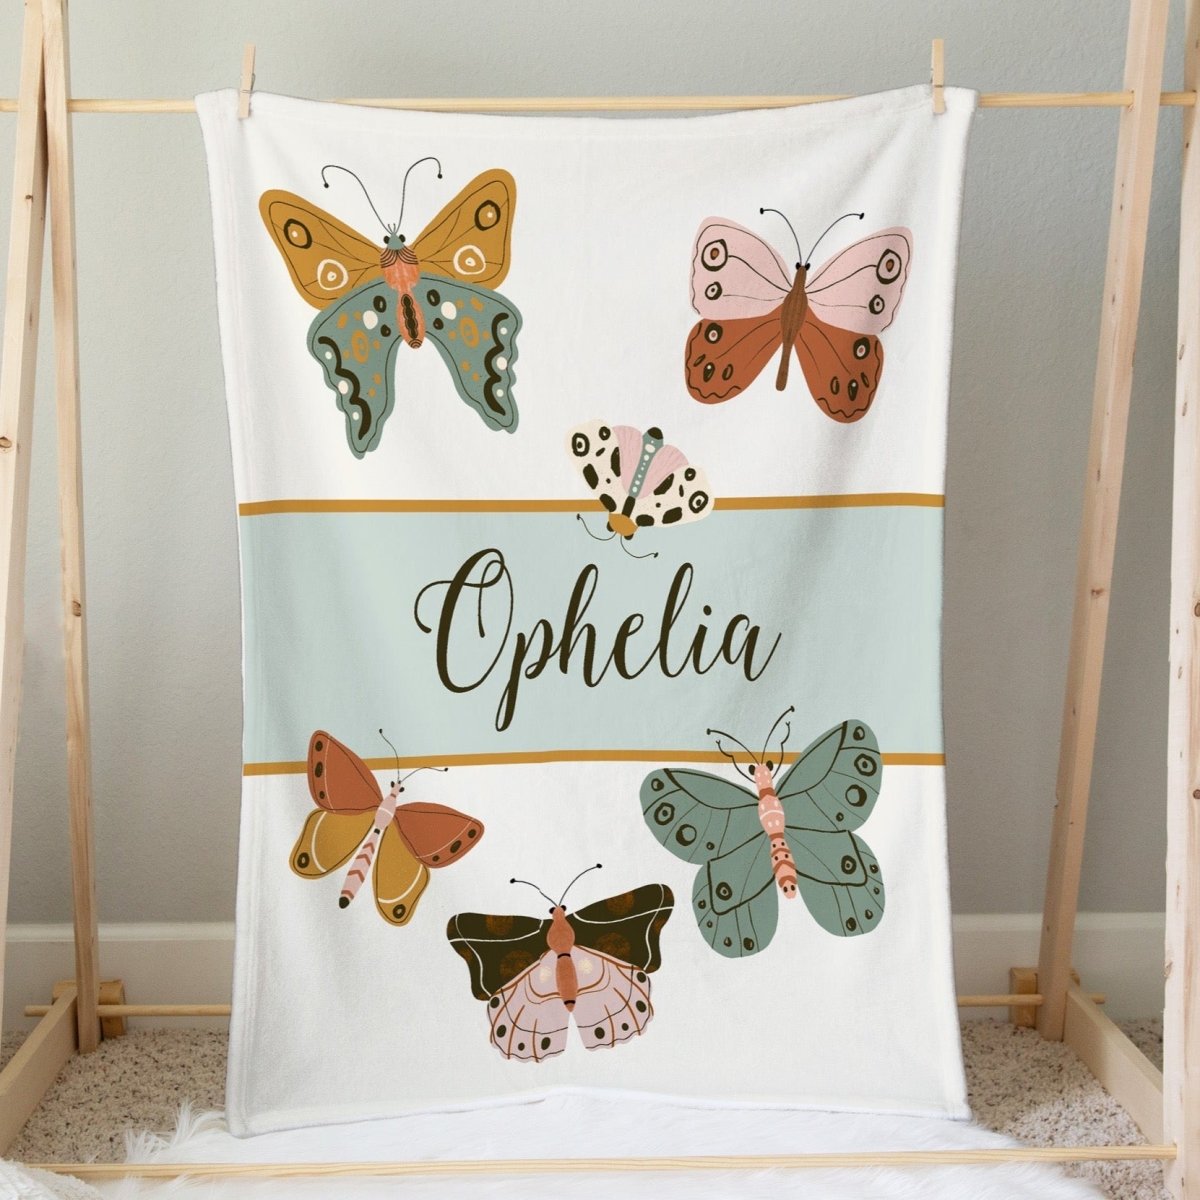 Vintage Butterfly Personalized Minky Blanket - gender_girl, Personalized_Yes, text